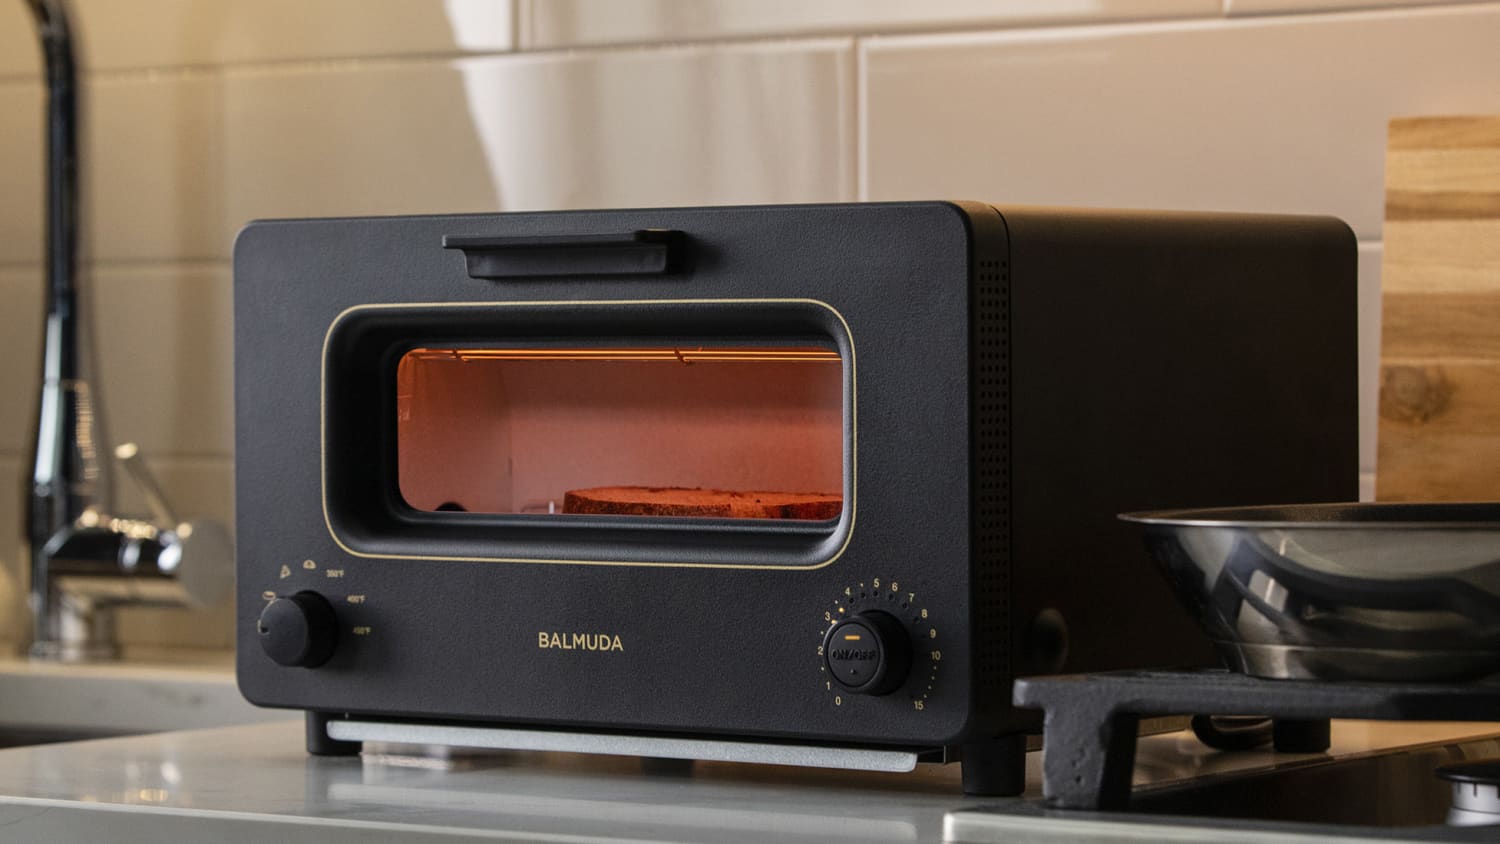 BALMUDA The Toaster | Steam Oven Toaster | 5 Cooking Modes - Sandwich  Bread, Artisan Bread, Pizza, Pastry, Oven | Compact Design | Baking Pan 